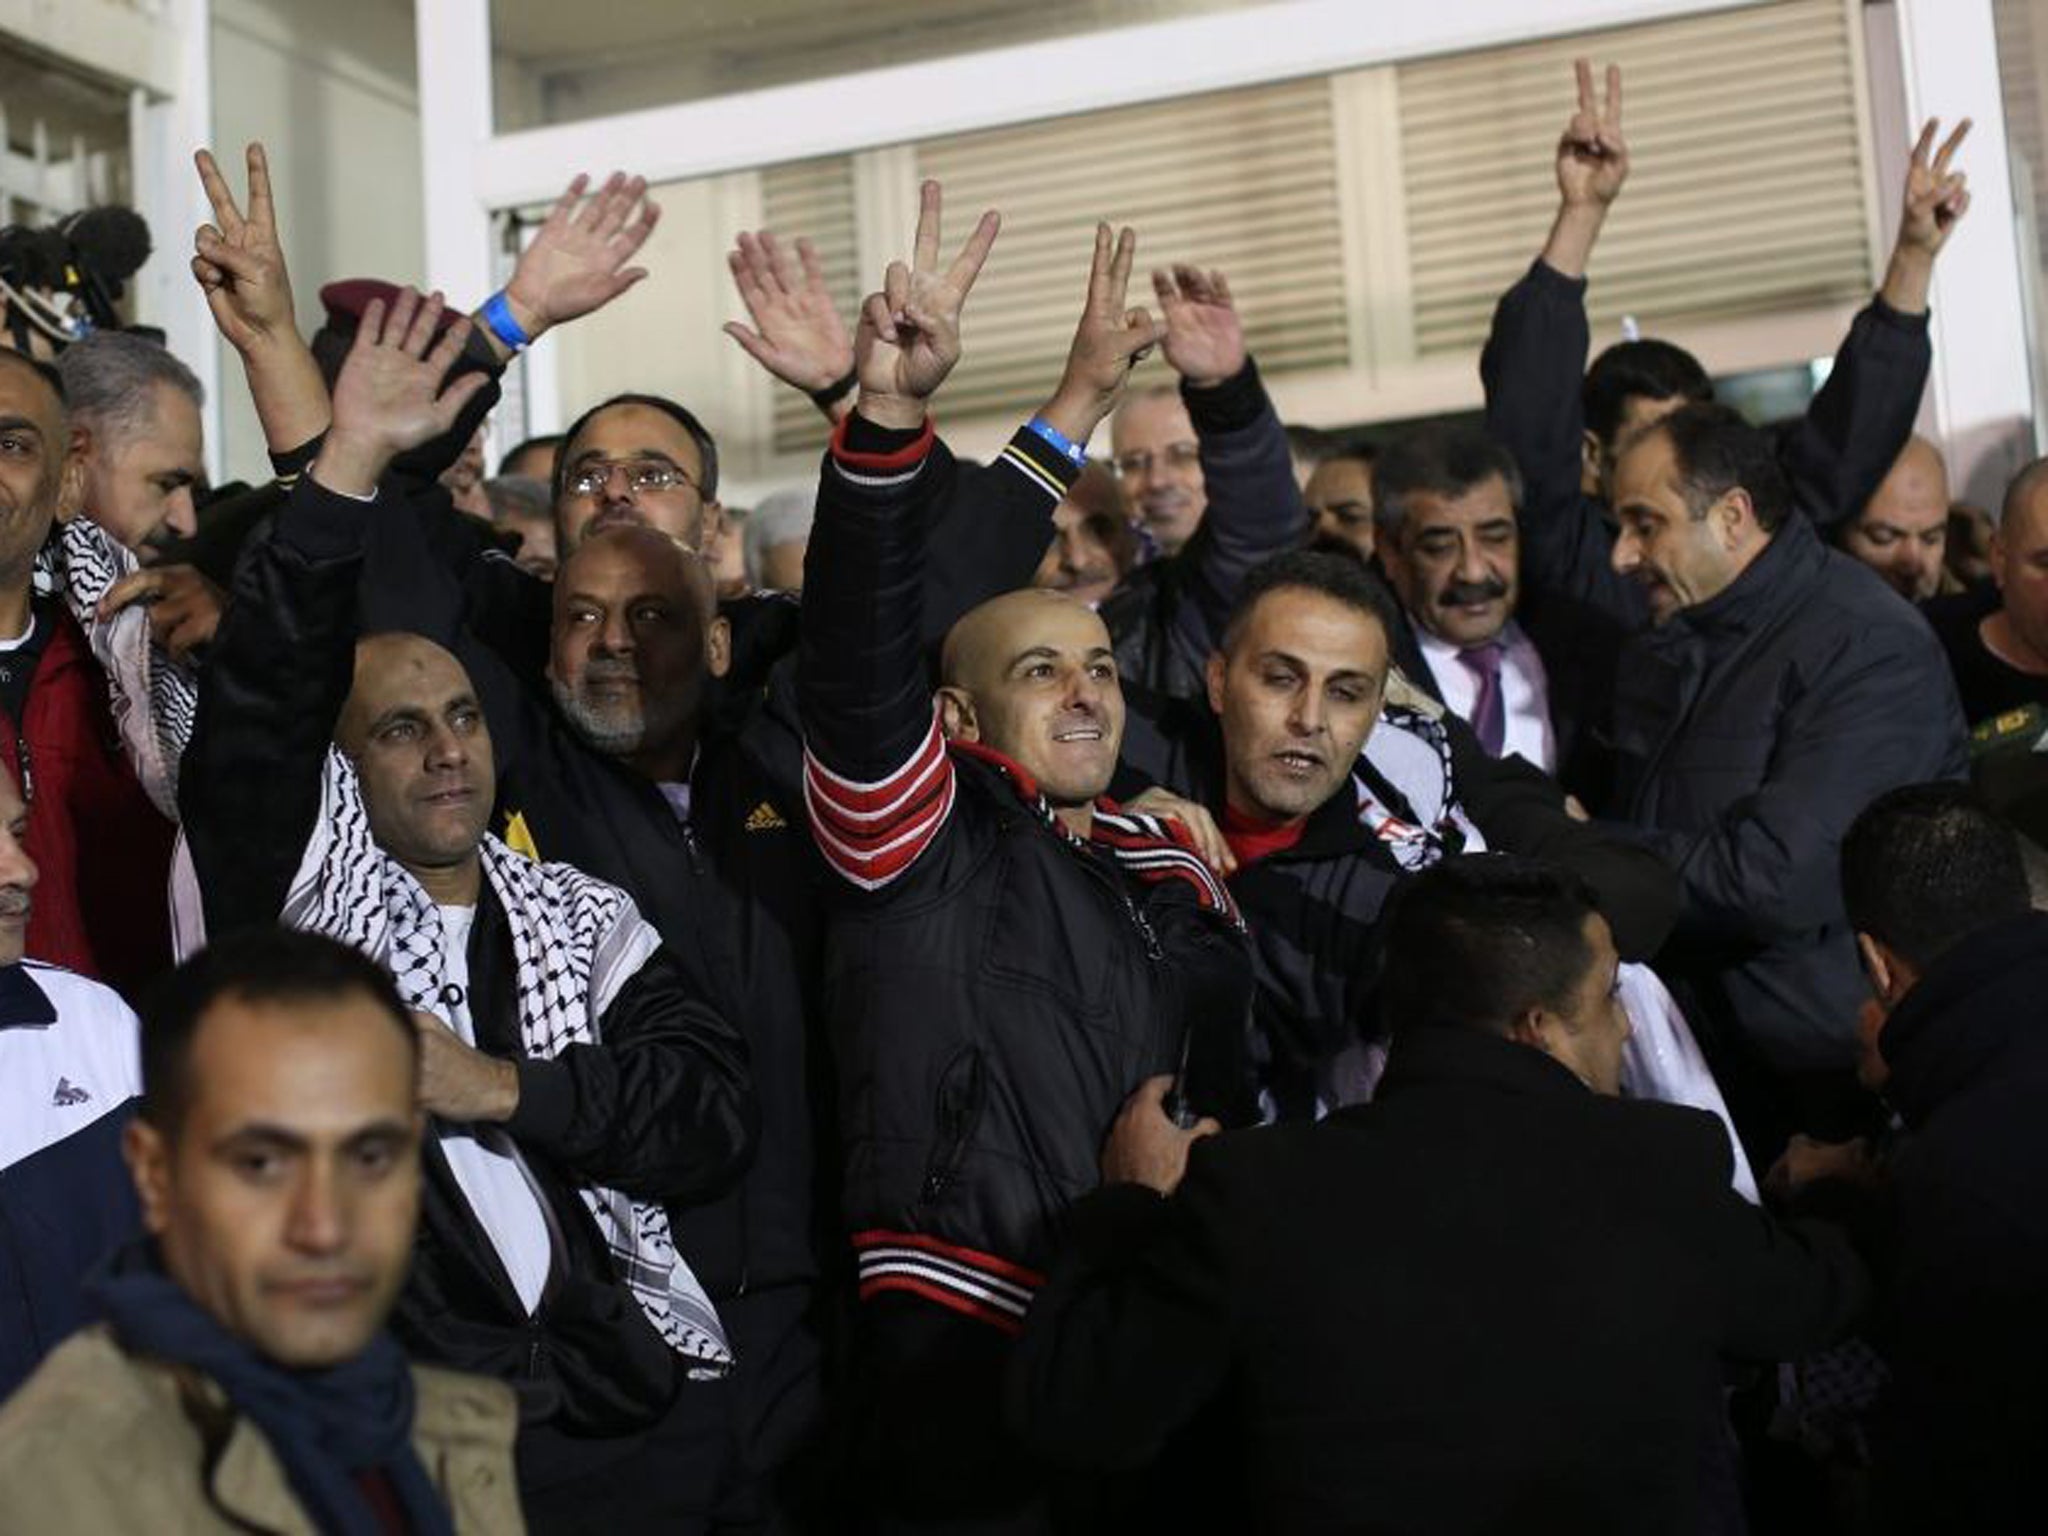 Released Palestinian prisoners gesture the V sign during a welcome ceremony at President Mahmoud Abbas' headquarters in Ramallah, West Bank